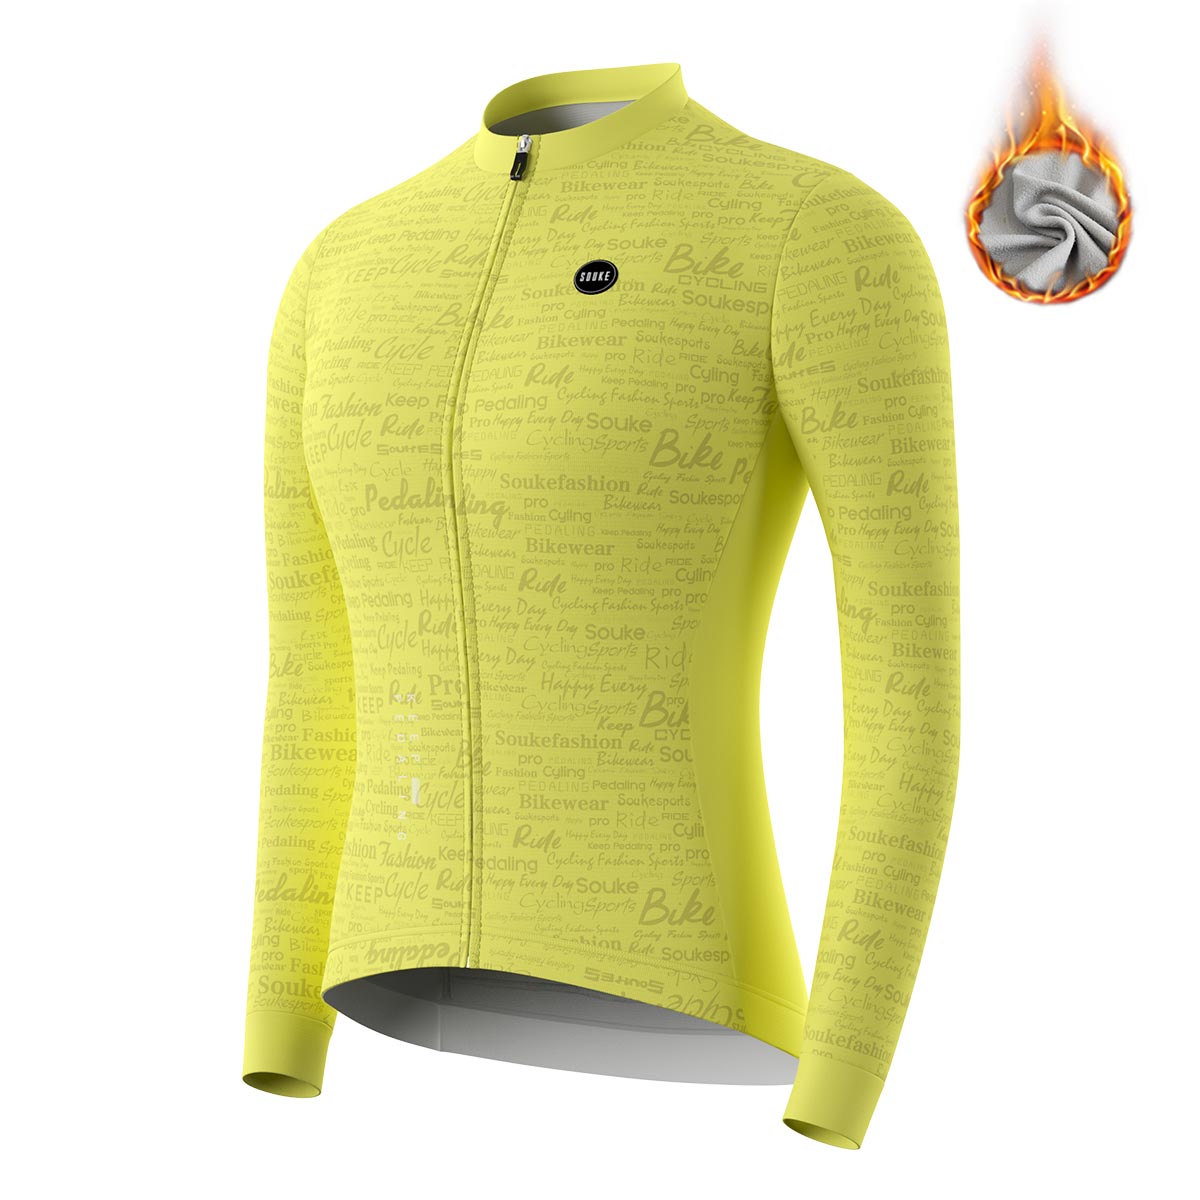 cycling long sleeve jersey, Graphene jersey,jersey for winter,Lime Yellow long jersey,jersey for winter and autumn, cold weather jersey (6805613052017)